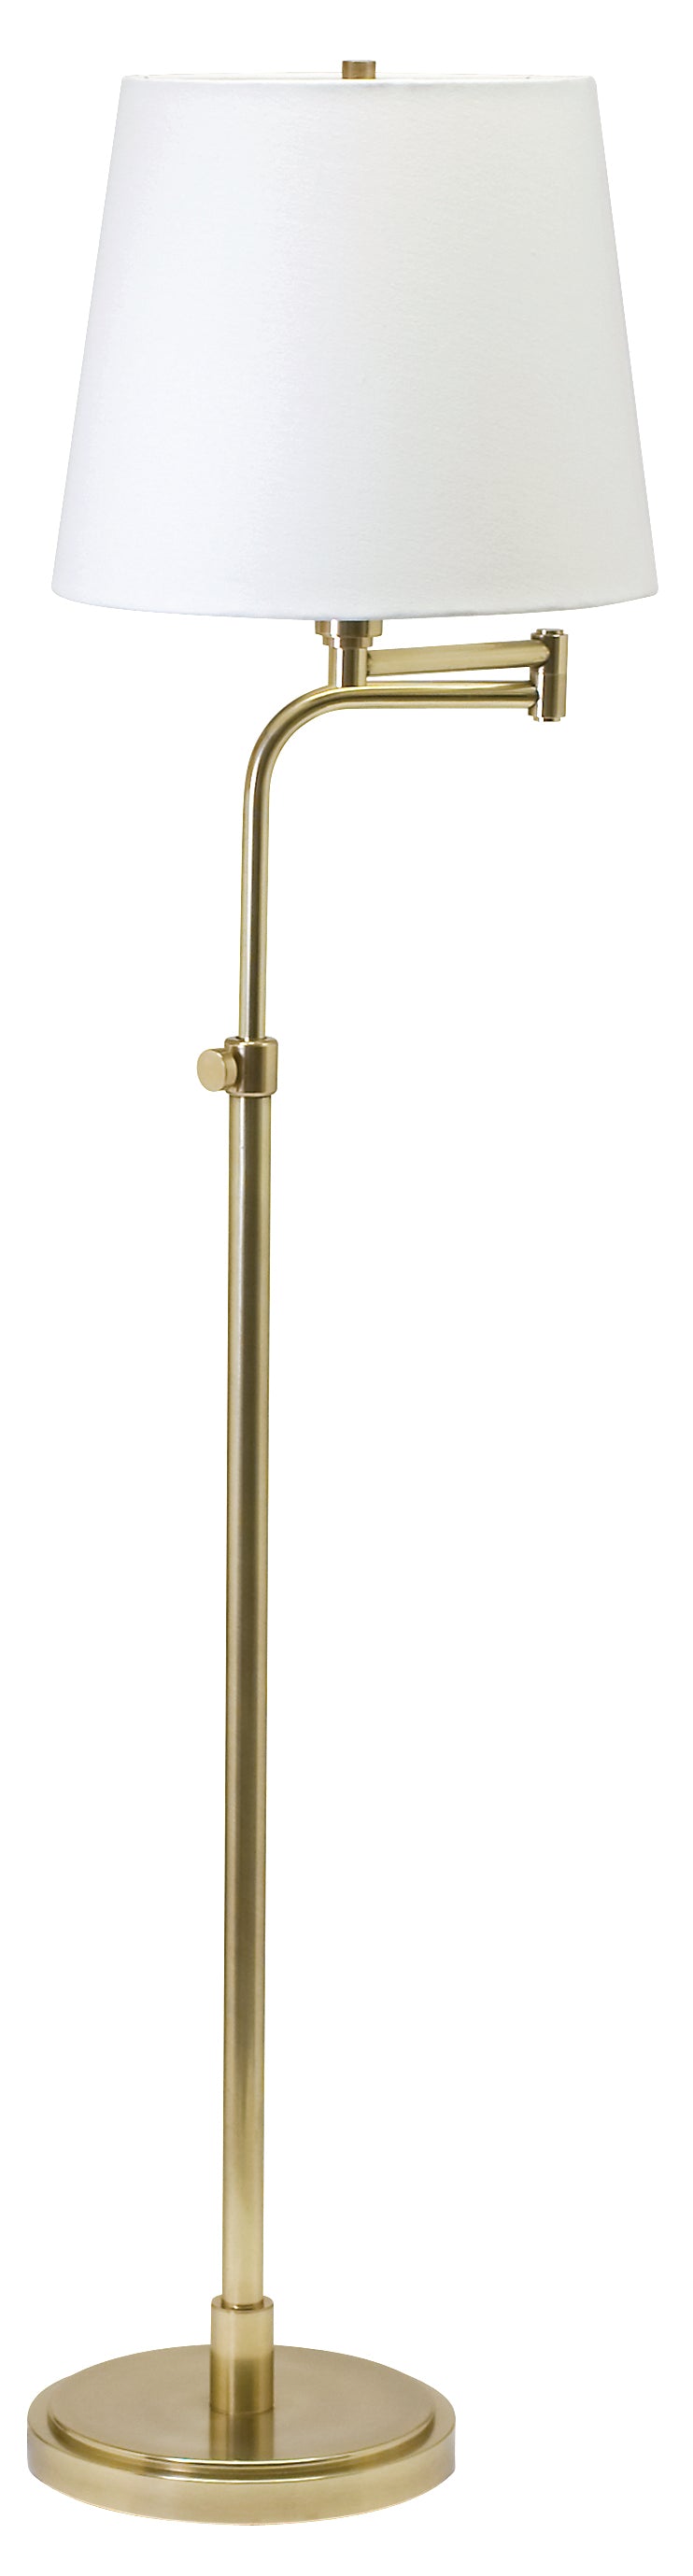 House of Troy Townhouse Adjustable Swing Arm Floor Lamp in Raw Brass TH700-RB